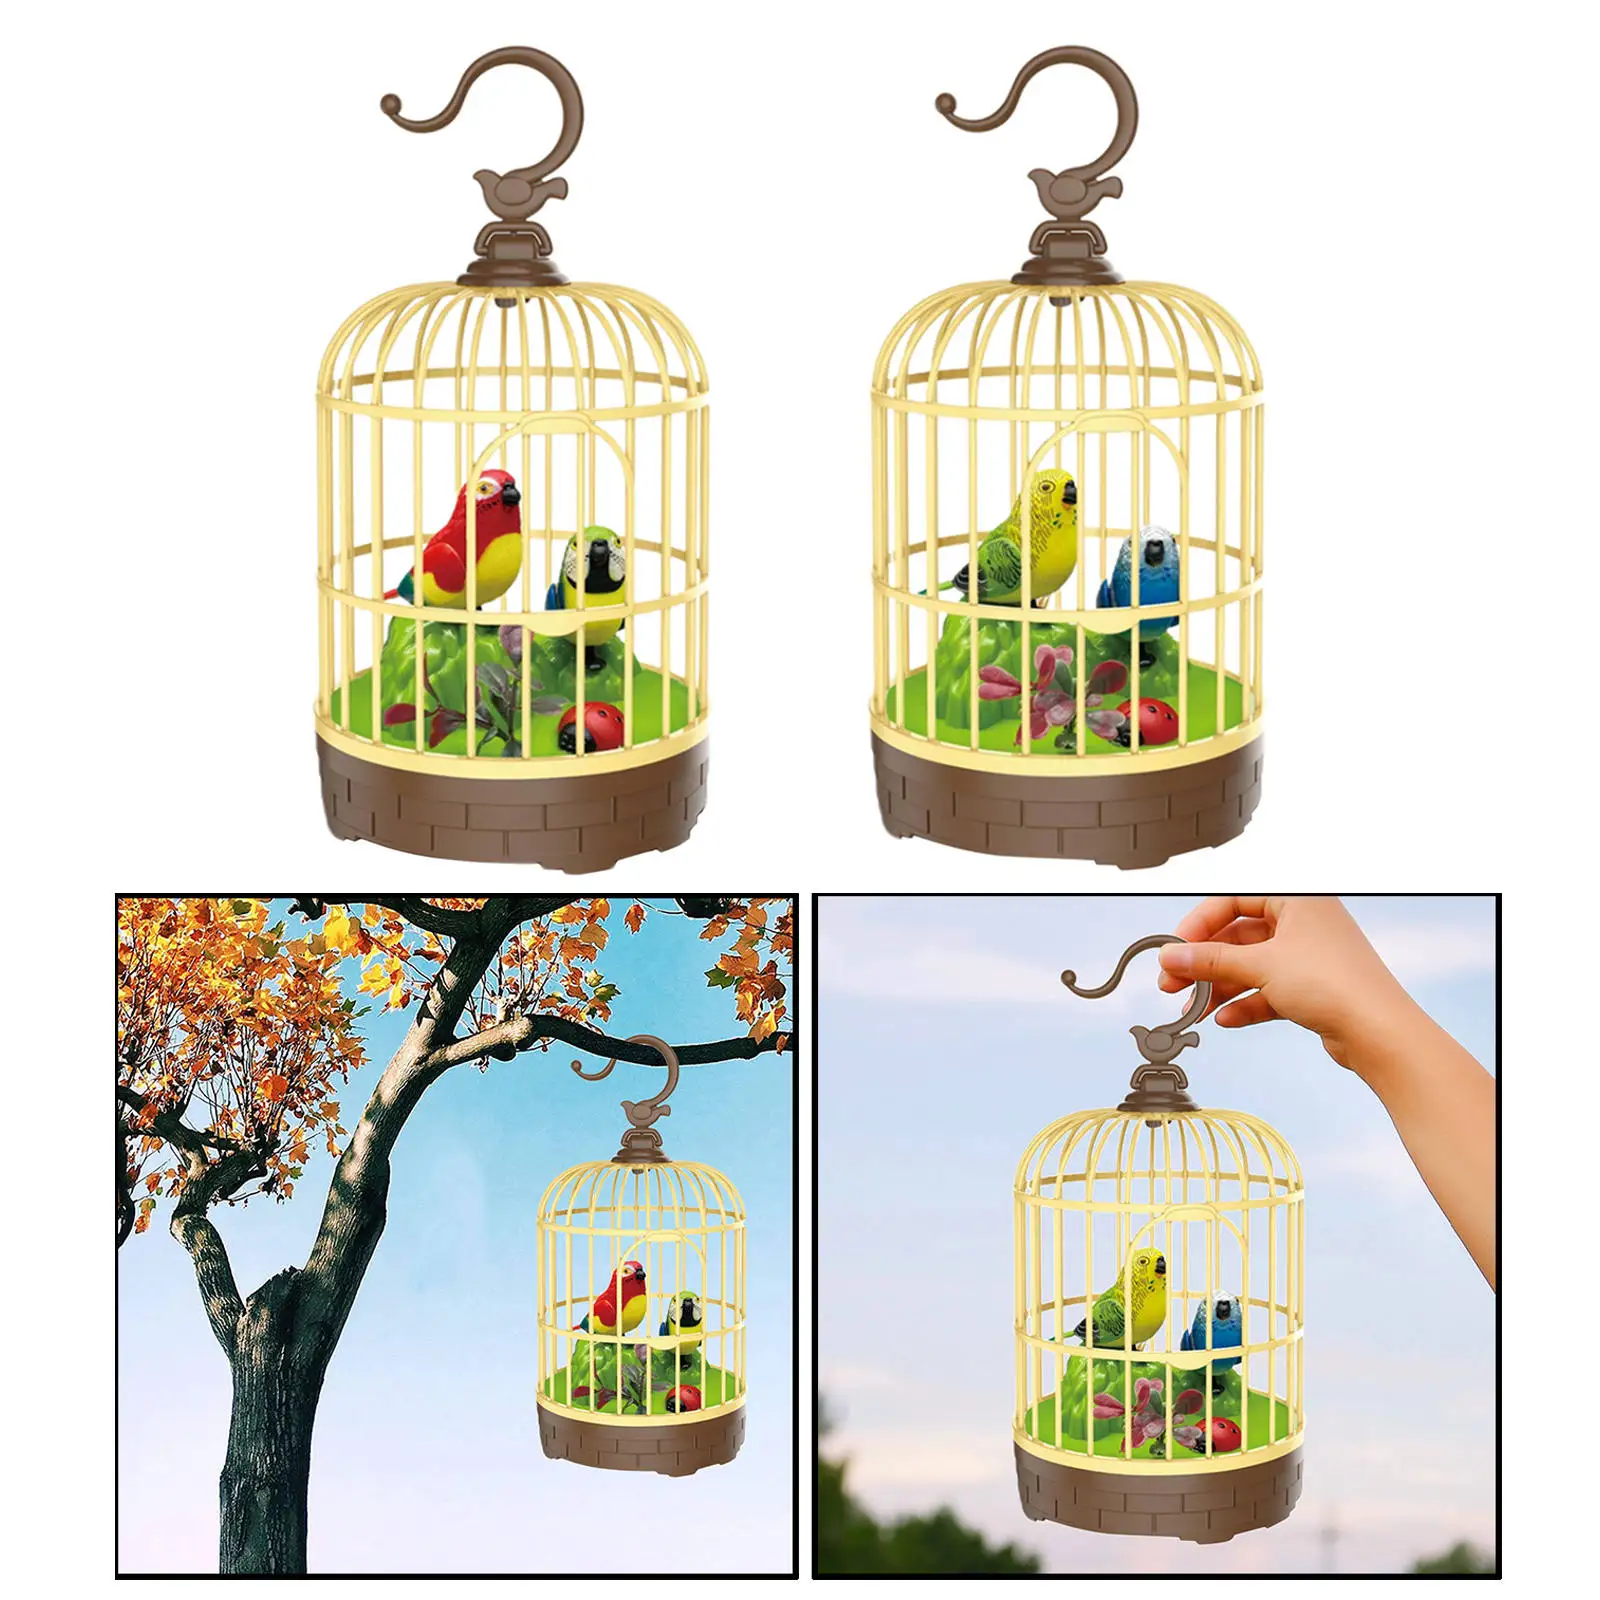 Recreation Mini Funny Singing Chirping Sound Activated Pet Home Decor Gift Bird In Cage Toy Battery Operated Children Kids